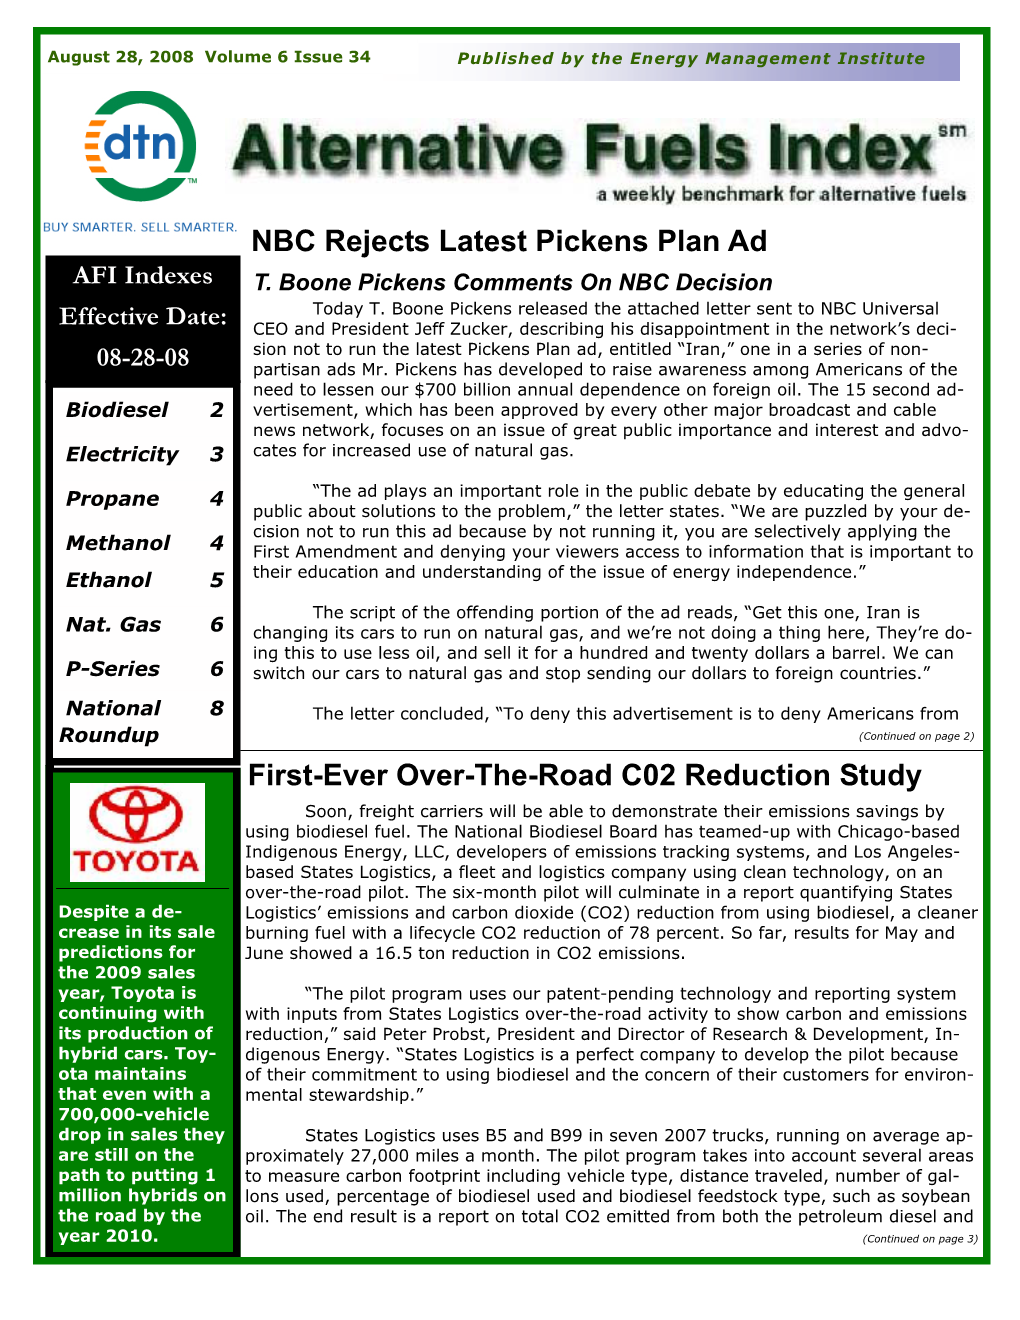 First-Ever Over-The-Road C02 Reduction Study NBC Rejects